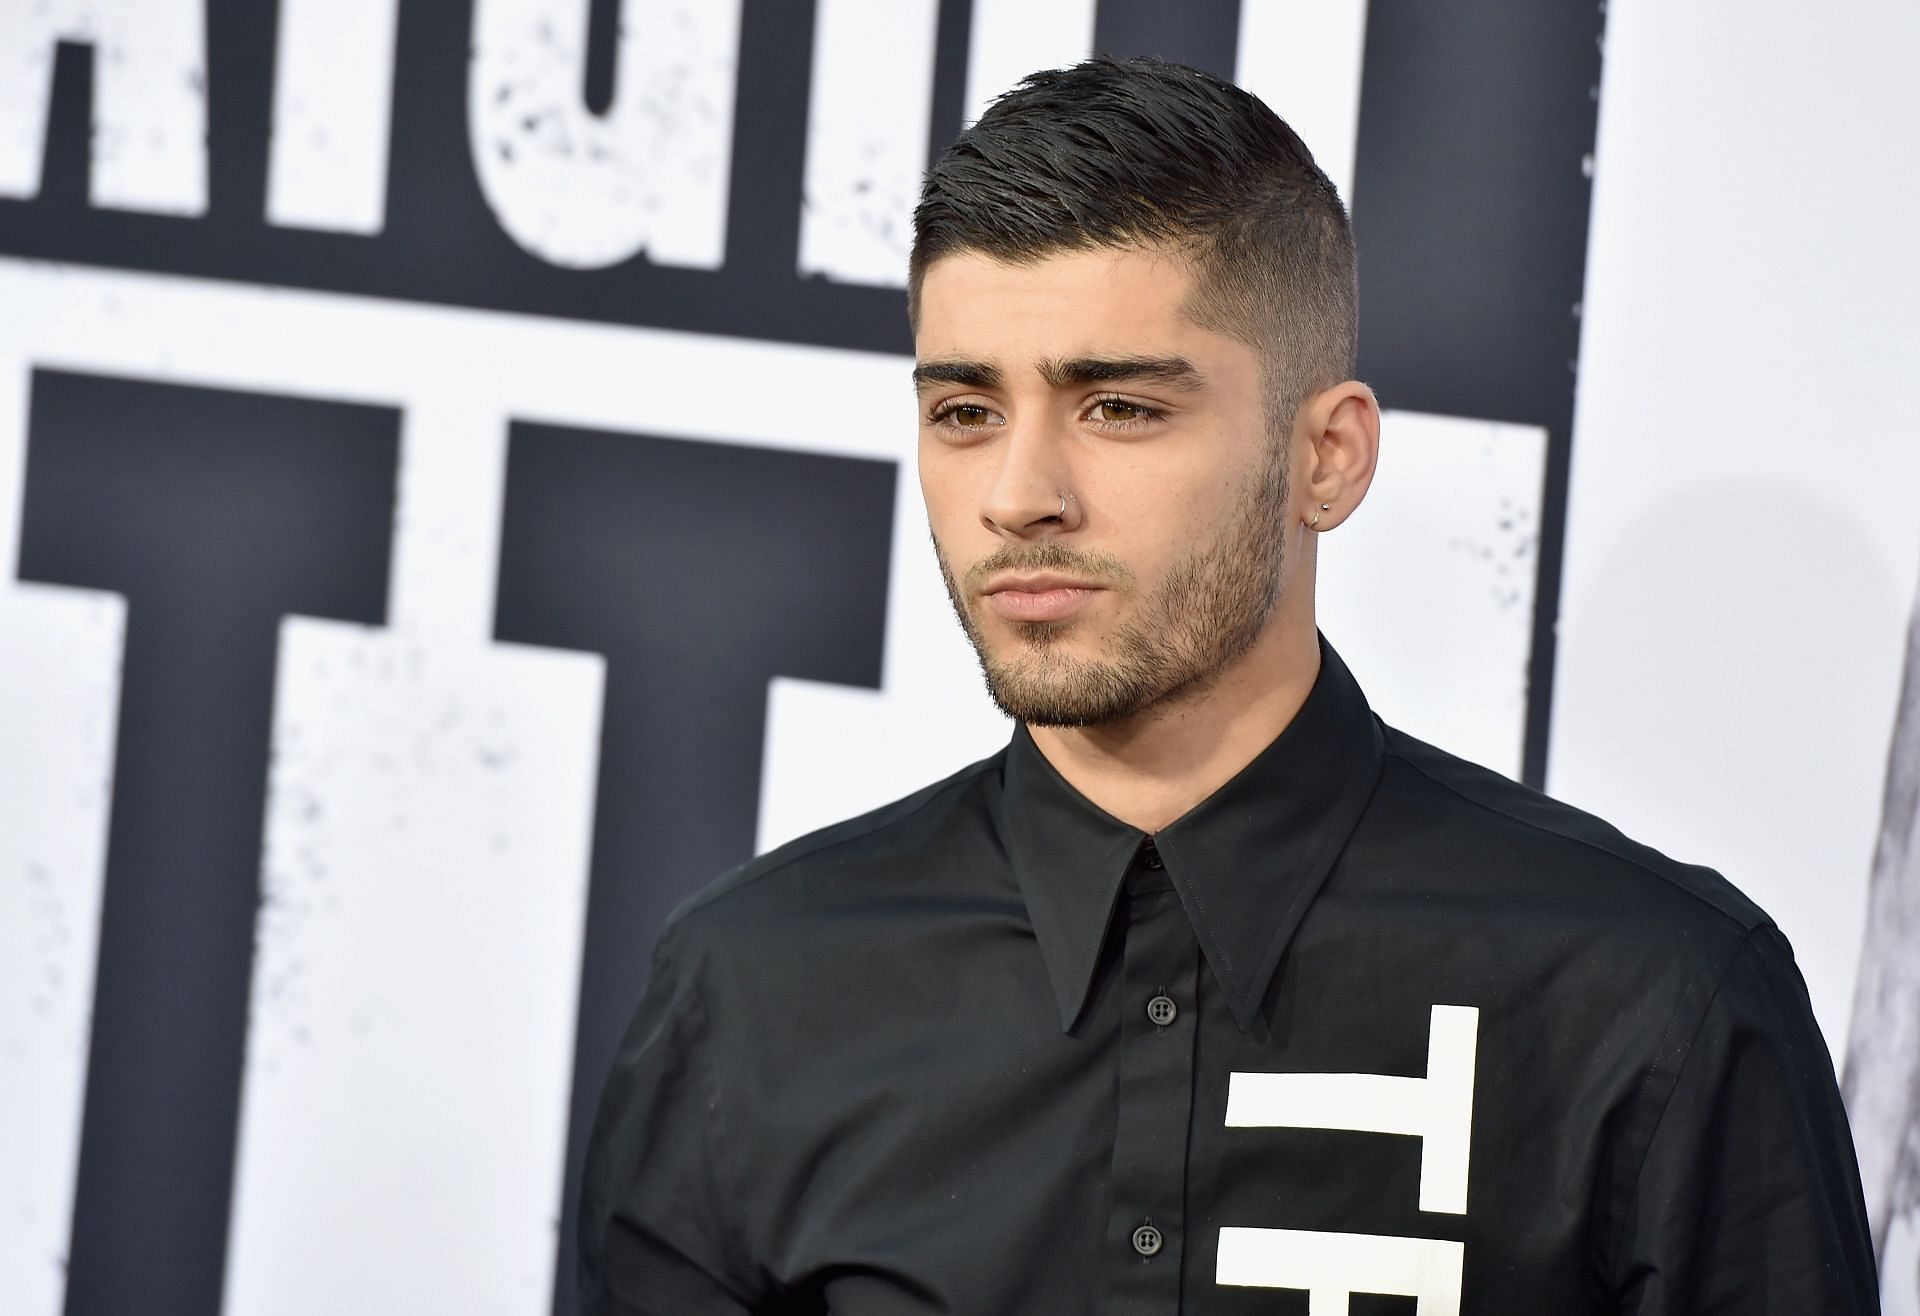 Zayn Malik celebrated the release of Room Under the Stairs with one-off concerts in the UK (Image via Kevin Winter/Getty Images)